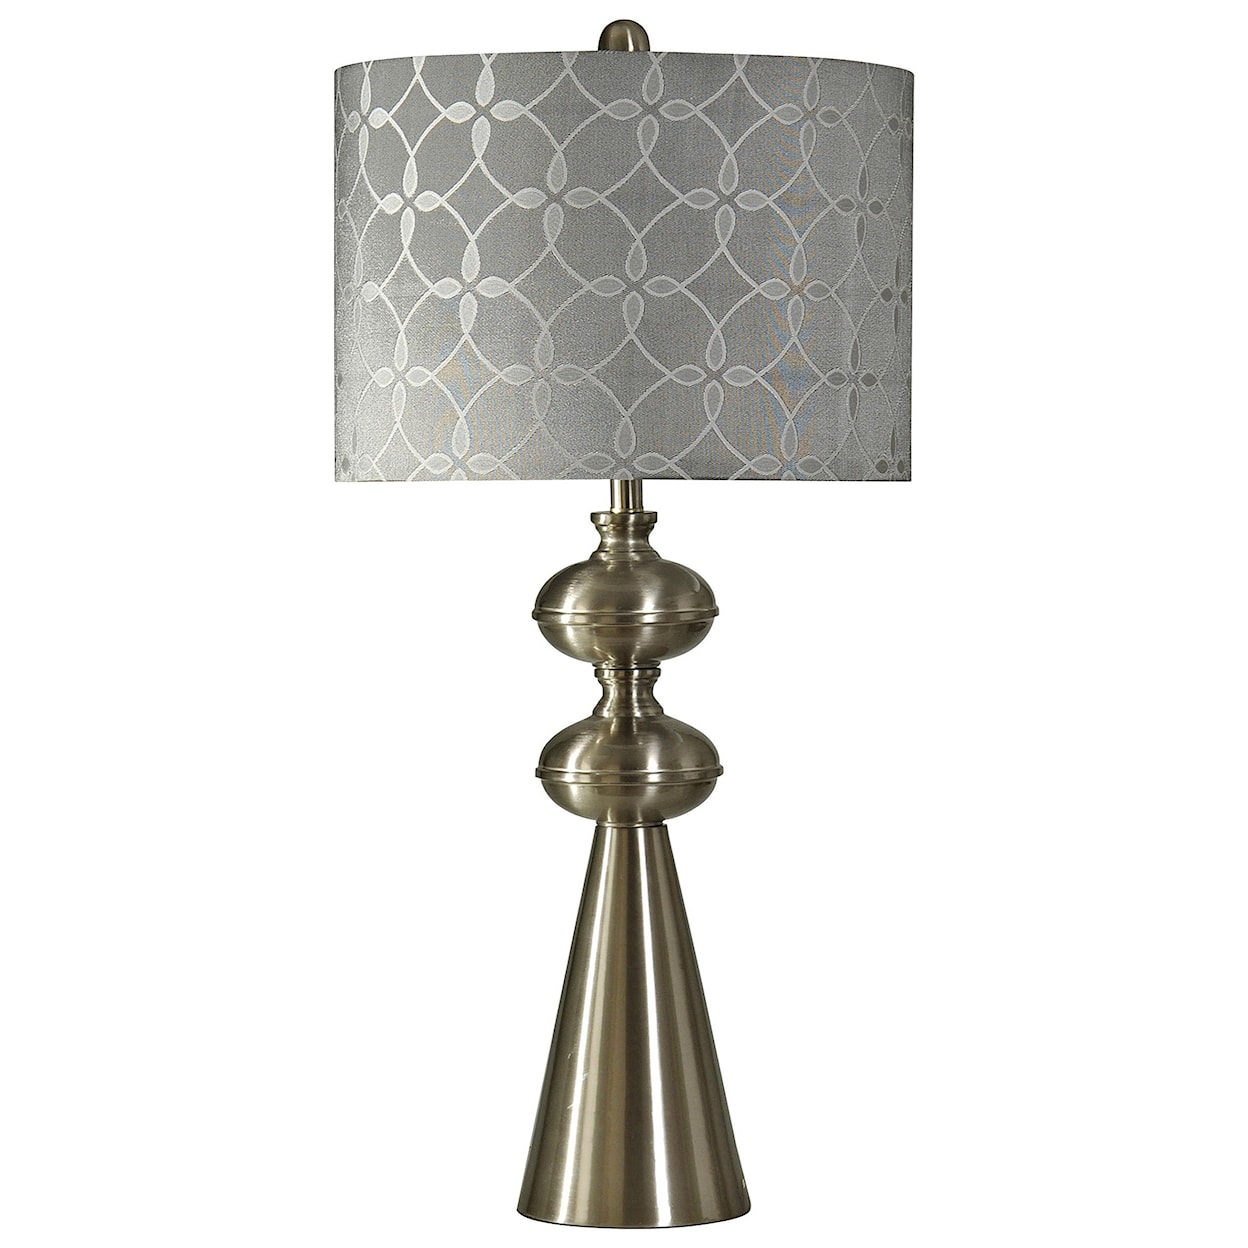 StyleCraft Lamps Transitional Brushed Steel Table Lamp